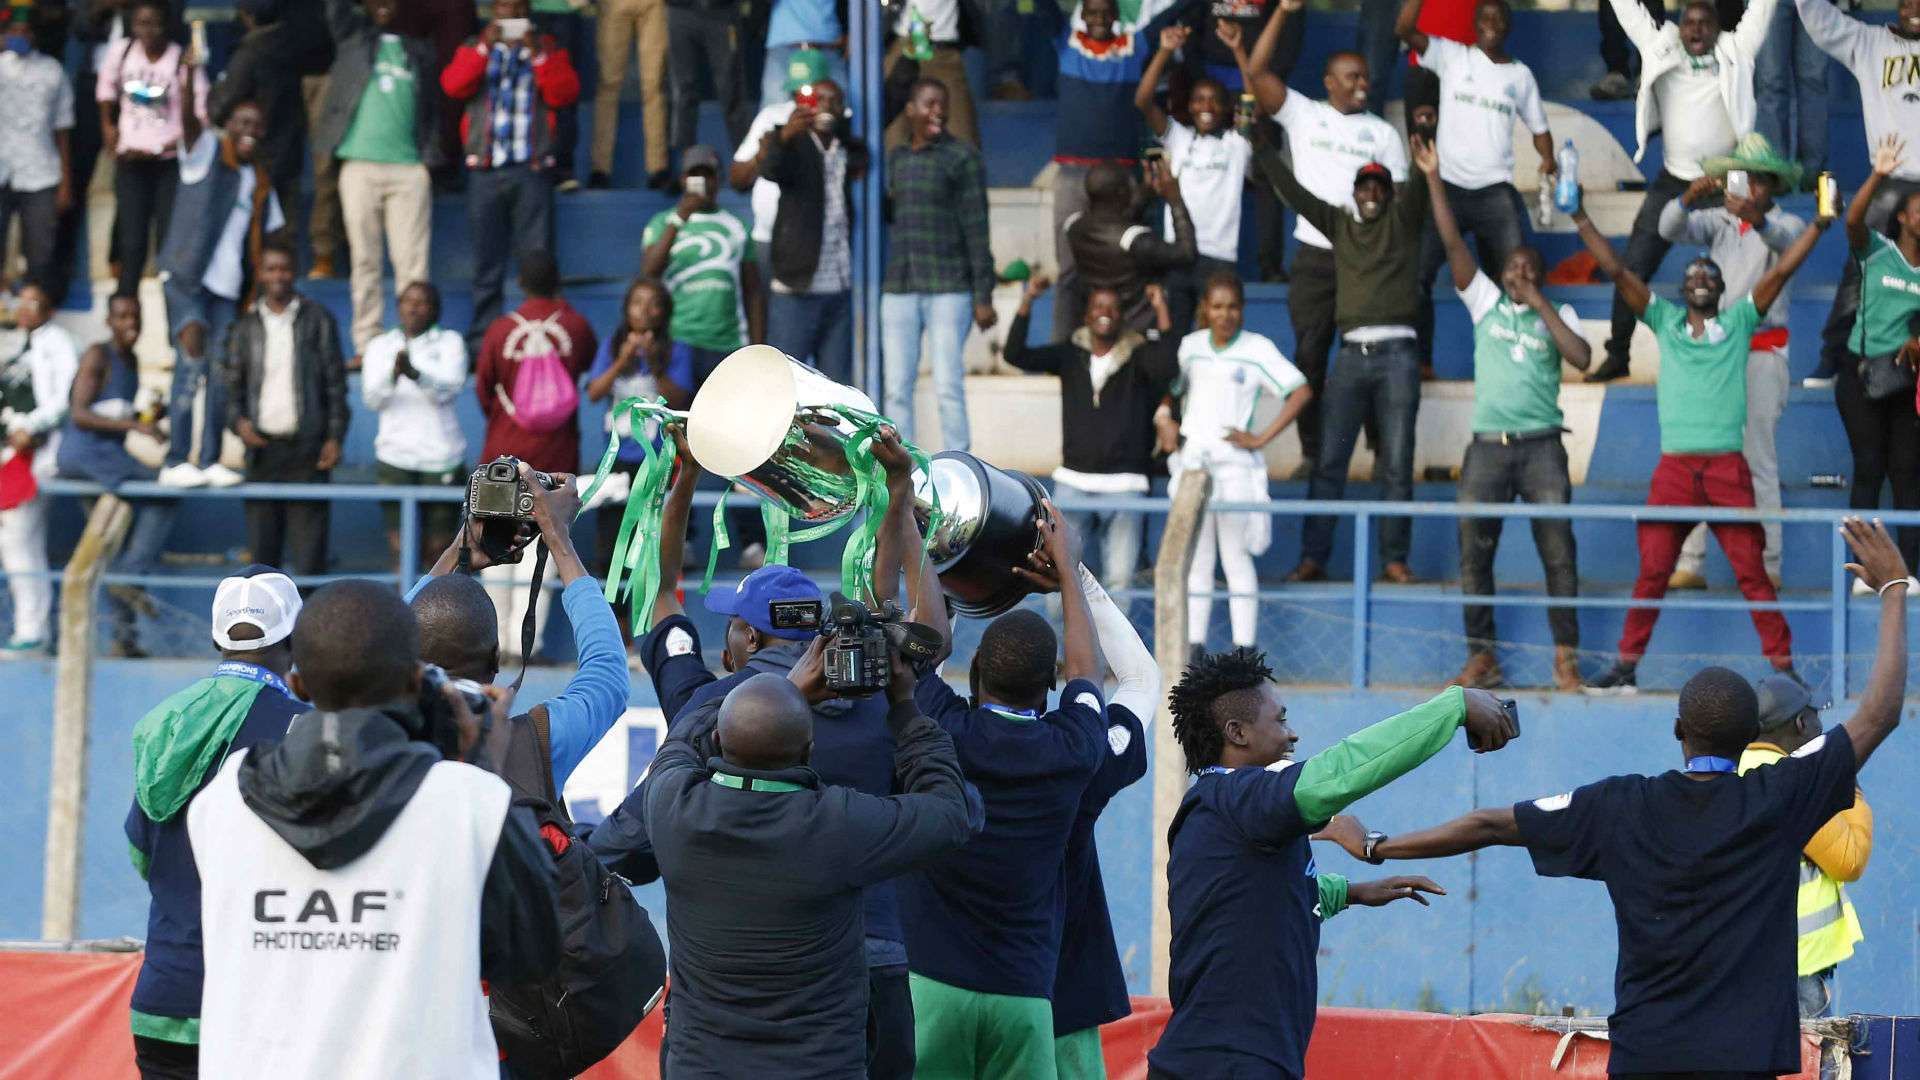 Gor Mahia players with KPL Trophy and fans.